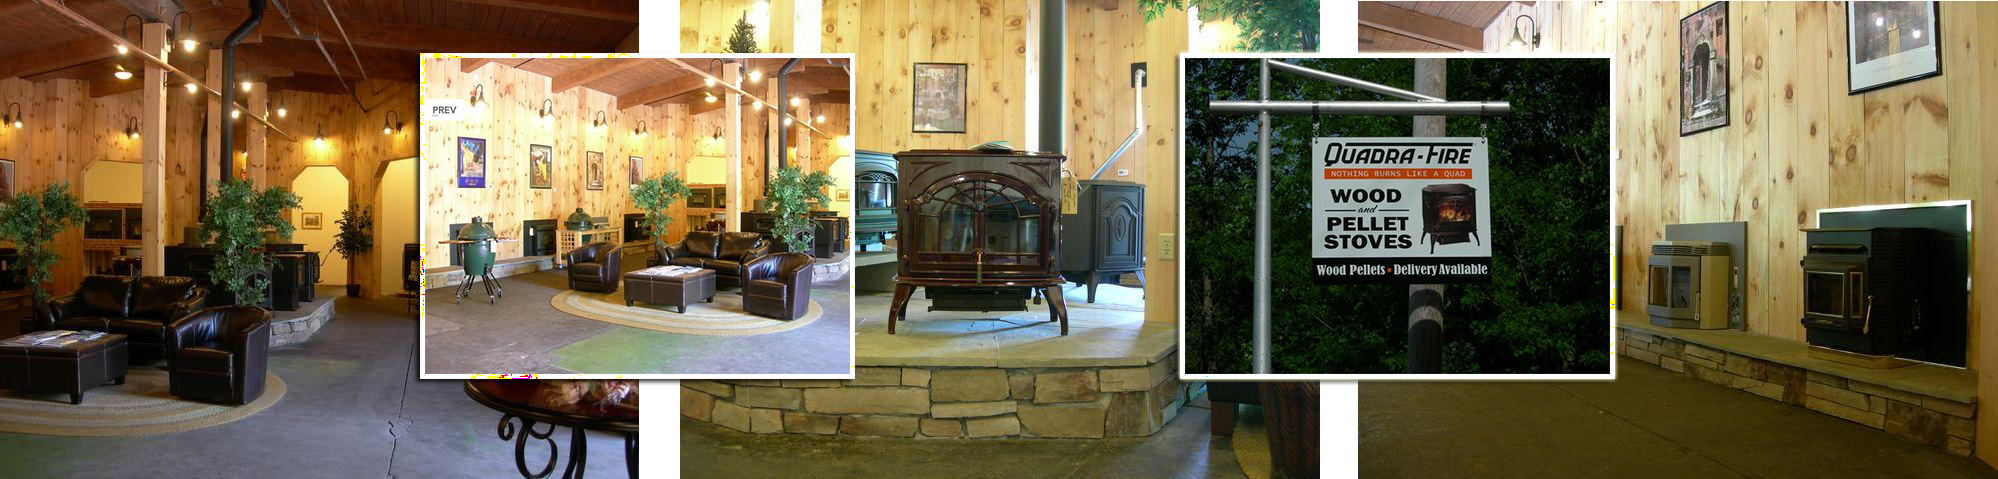 McKenney Hearth and Home Building or Showroom